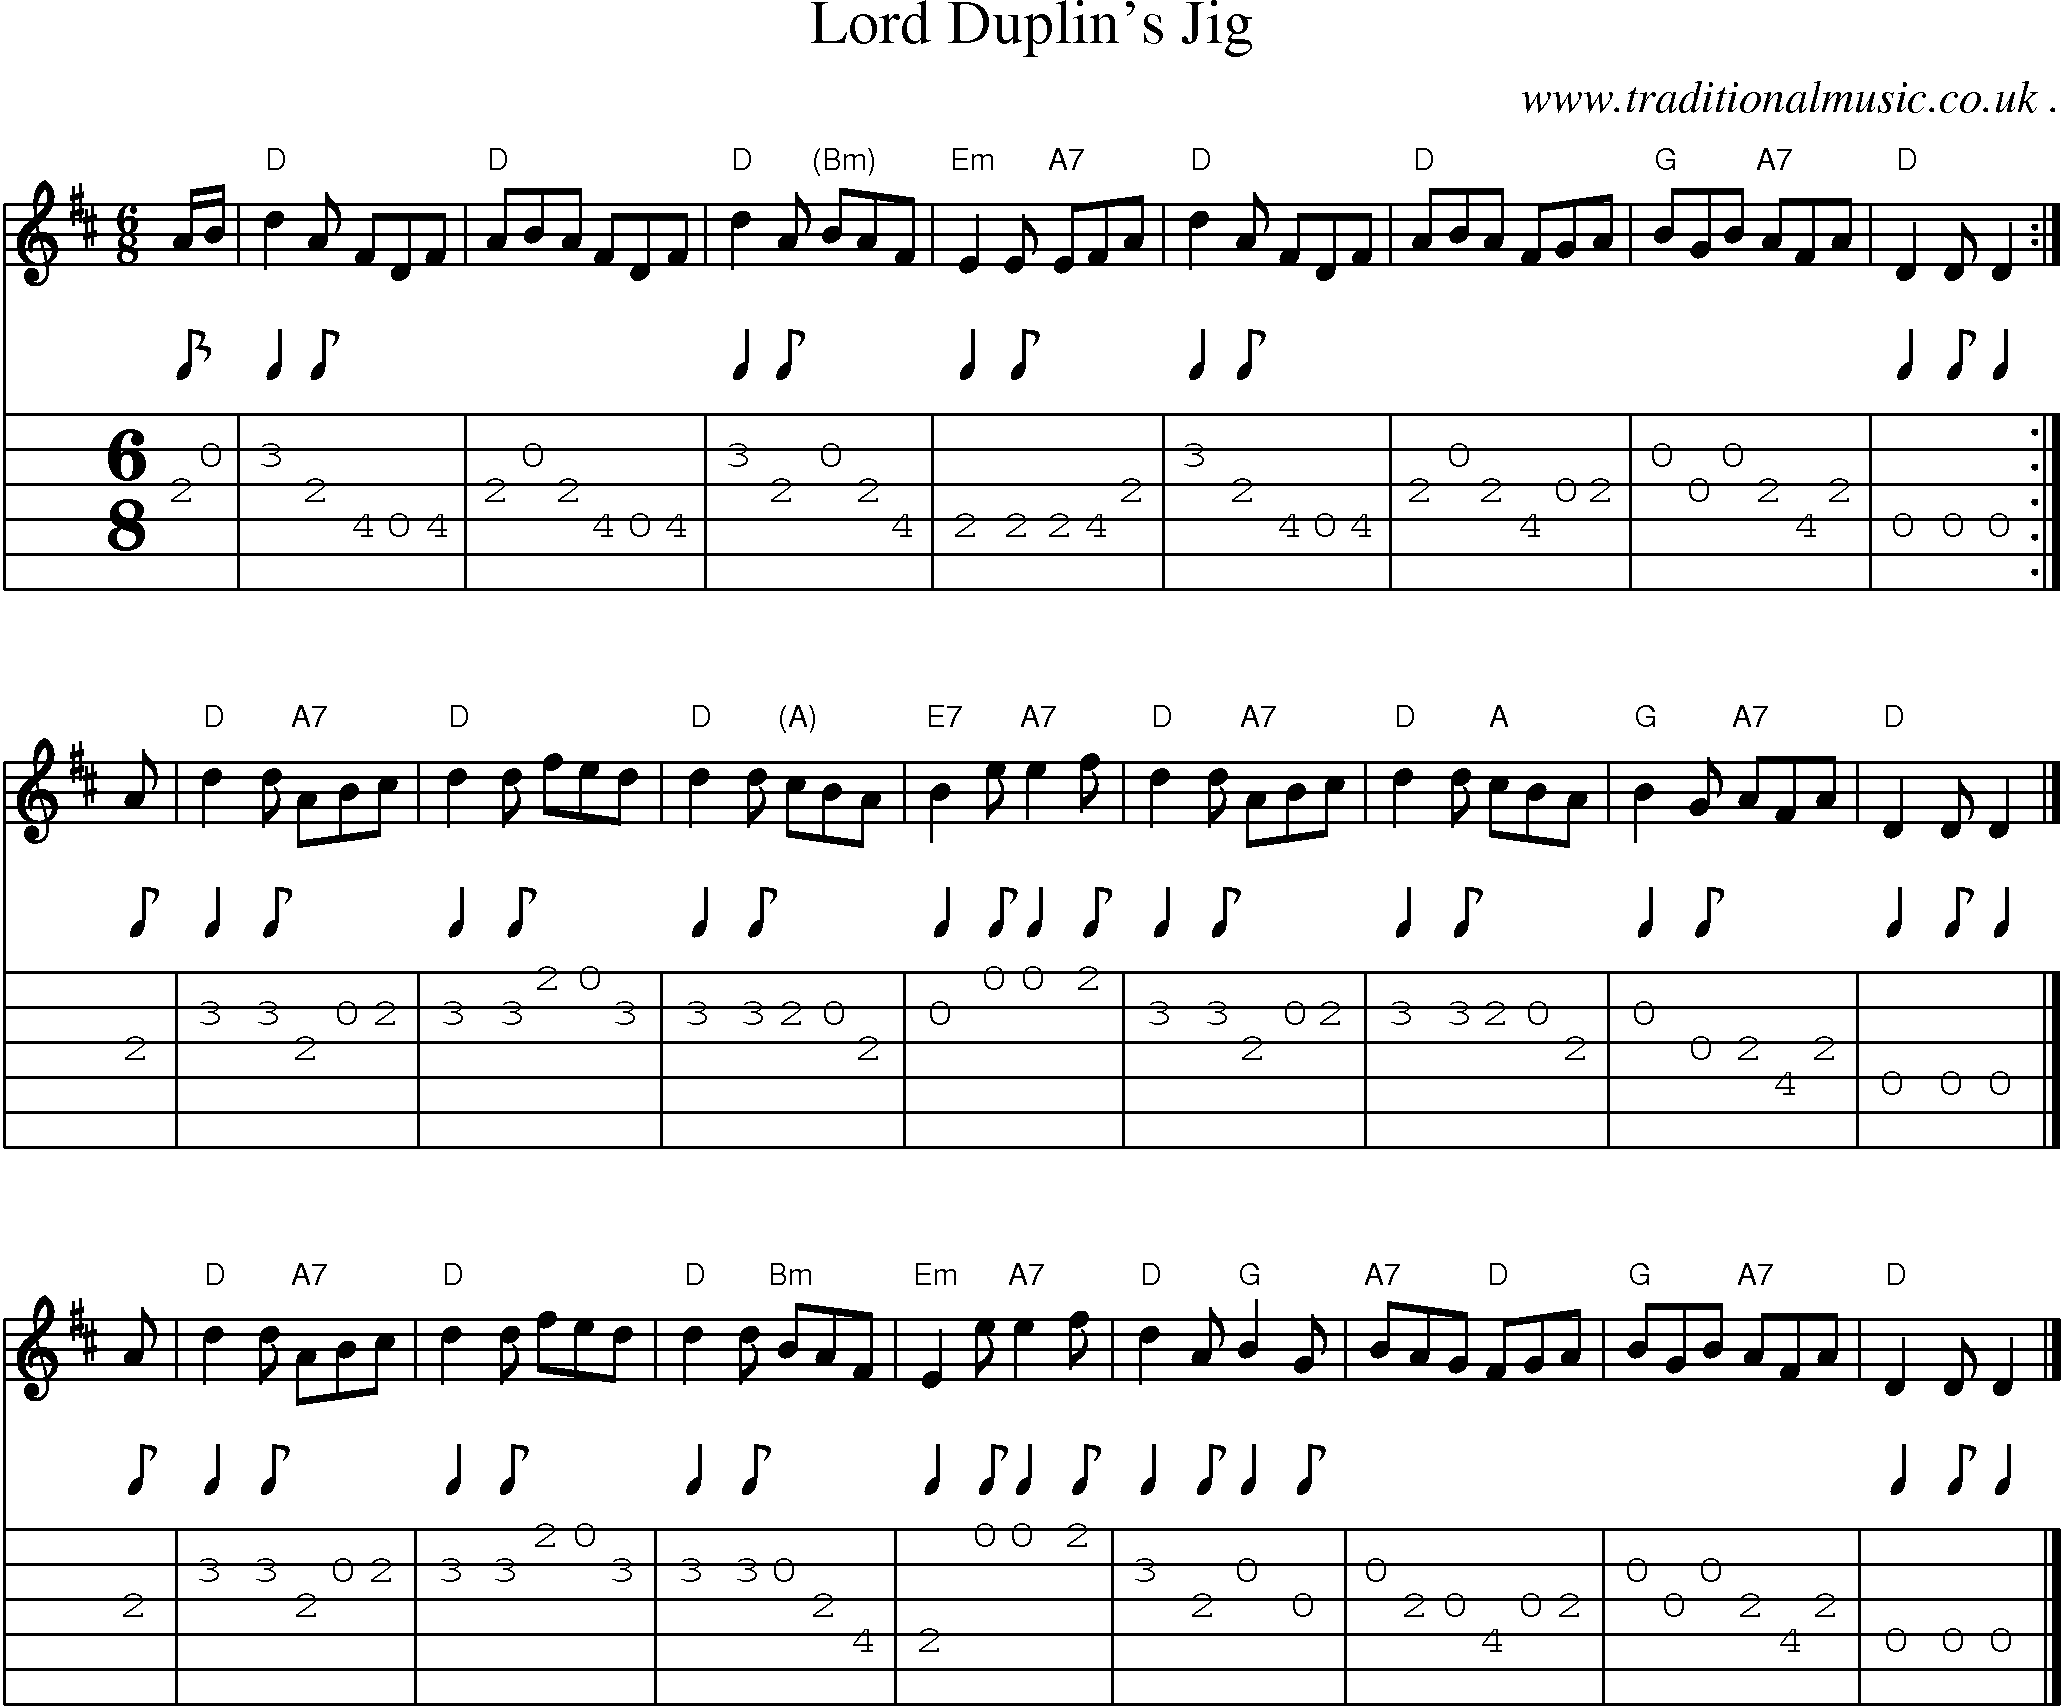 Sheet-music  score, Chords and Guitar Tabs for Lord Duplins Jig